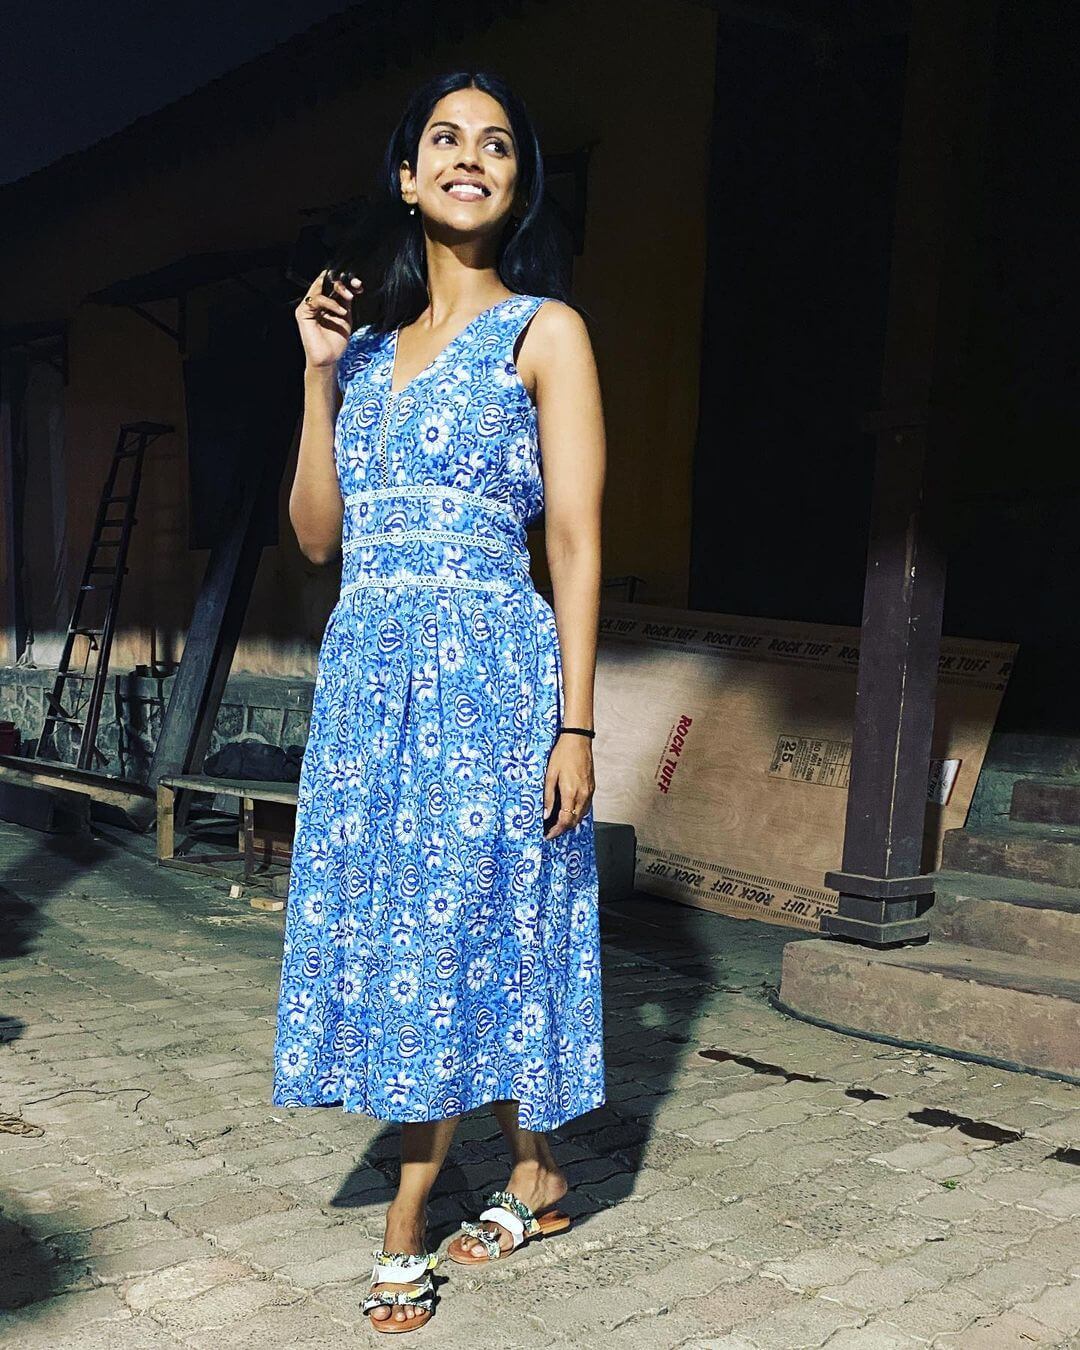 Aditi Sarangdhar Cool,Breezy & Ethnical Outfit Looks: Western Outfit & Looks 